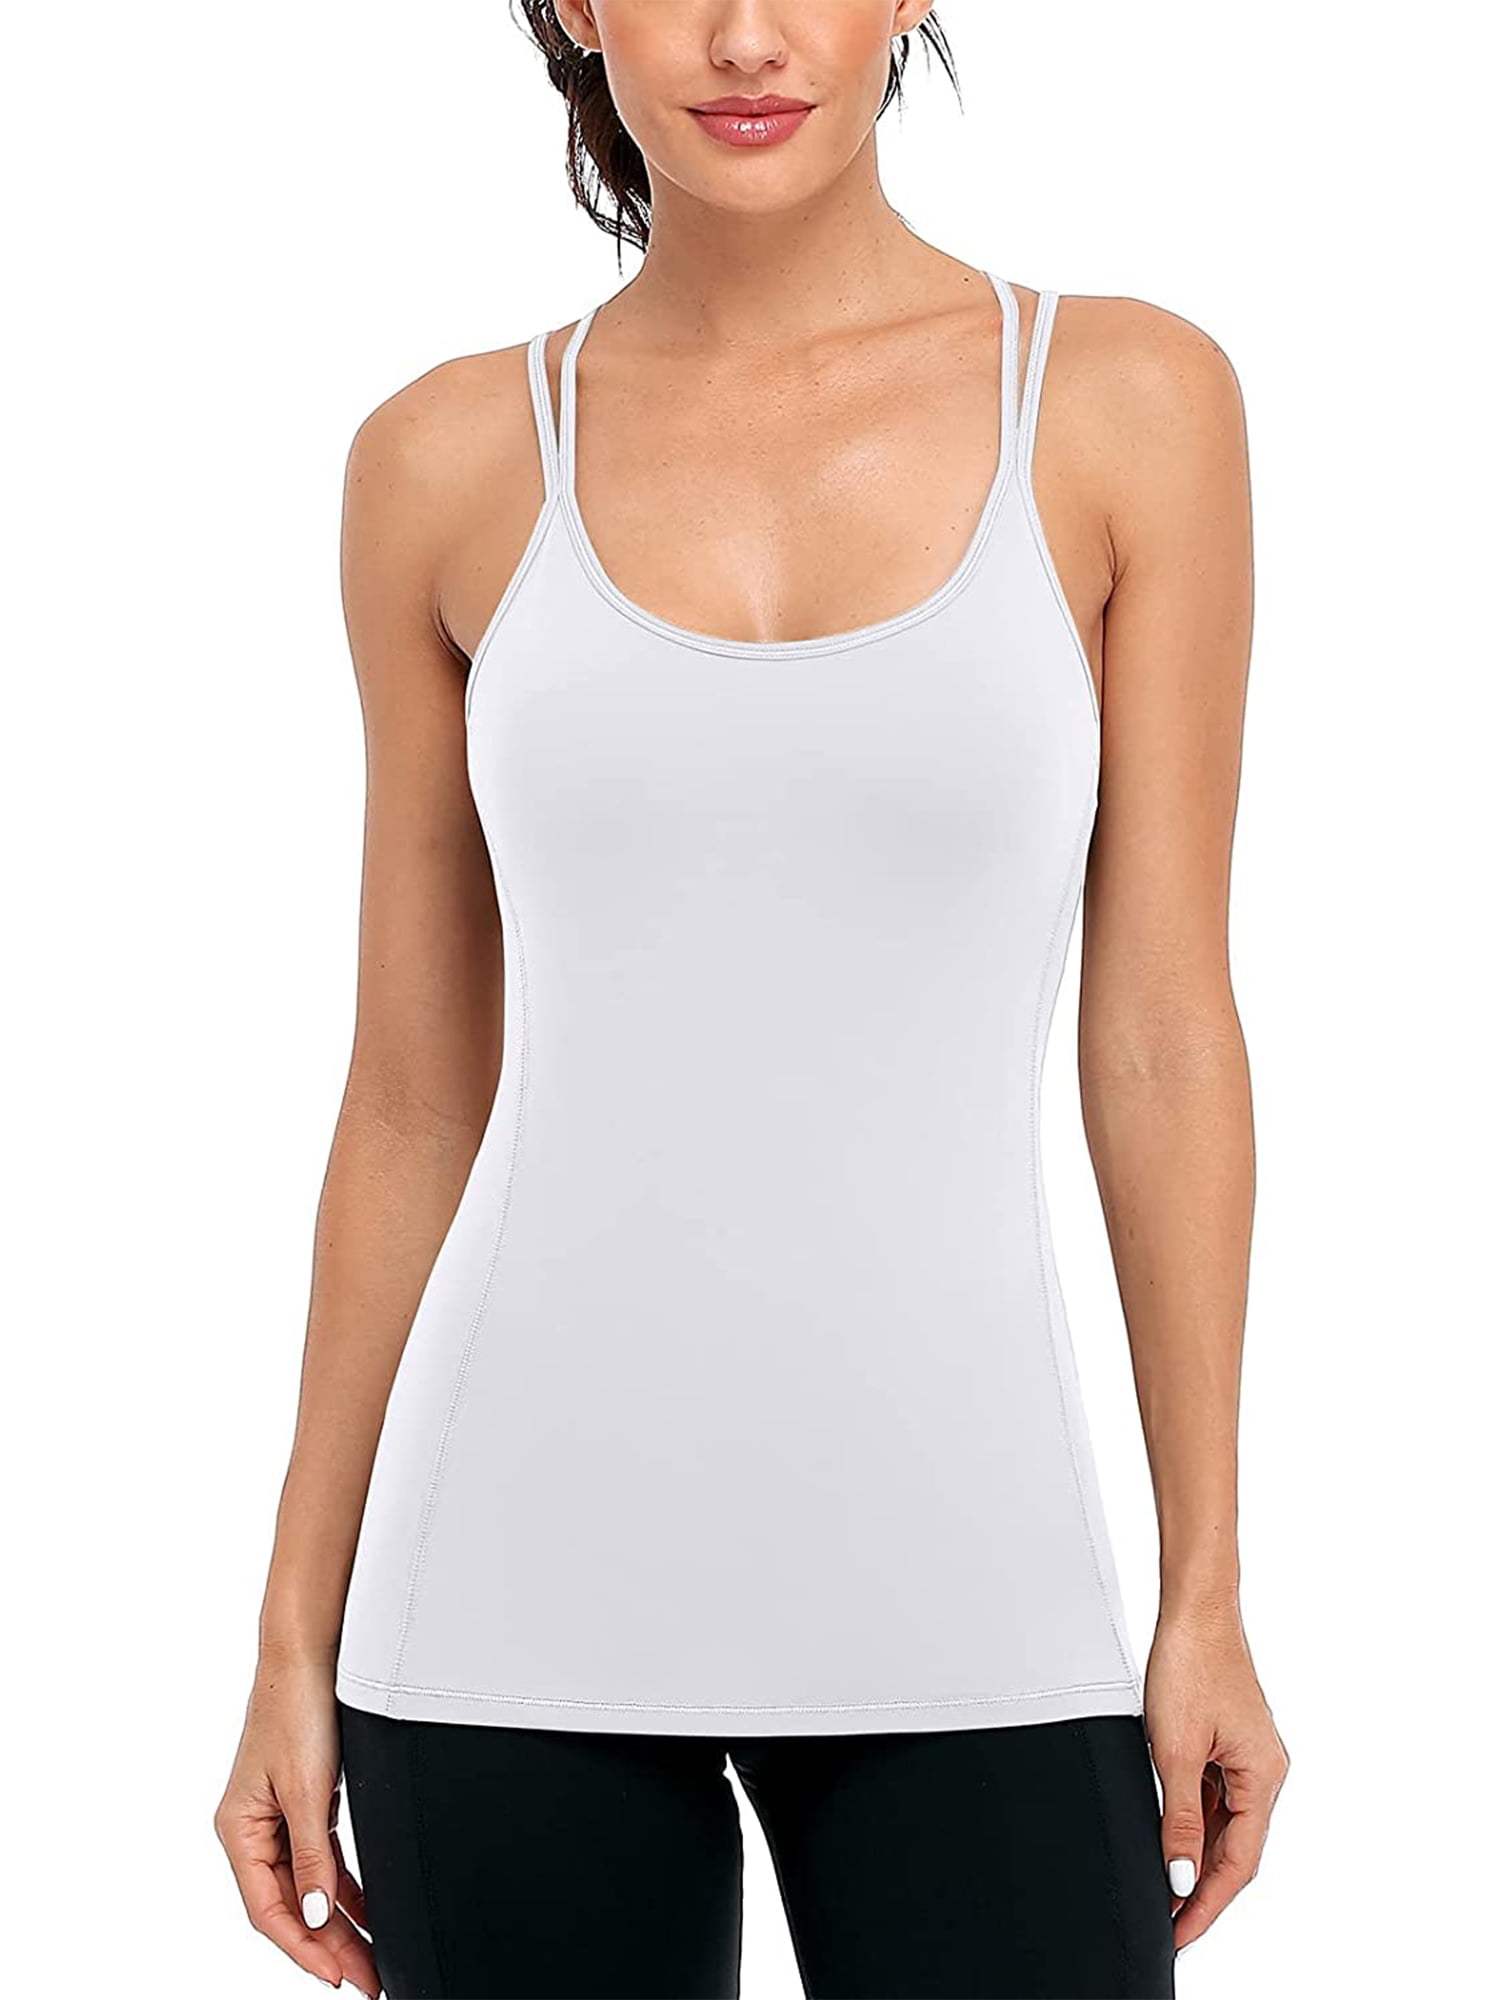 Women's Workout Tank Tops with Built in Bra Athletic Camisole Strappy Back  Yoga Tanks 